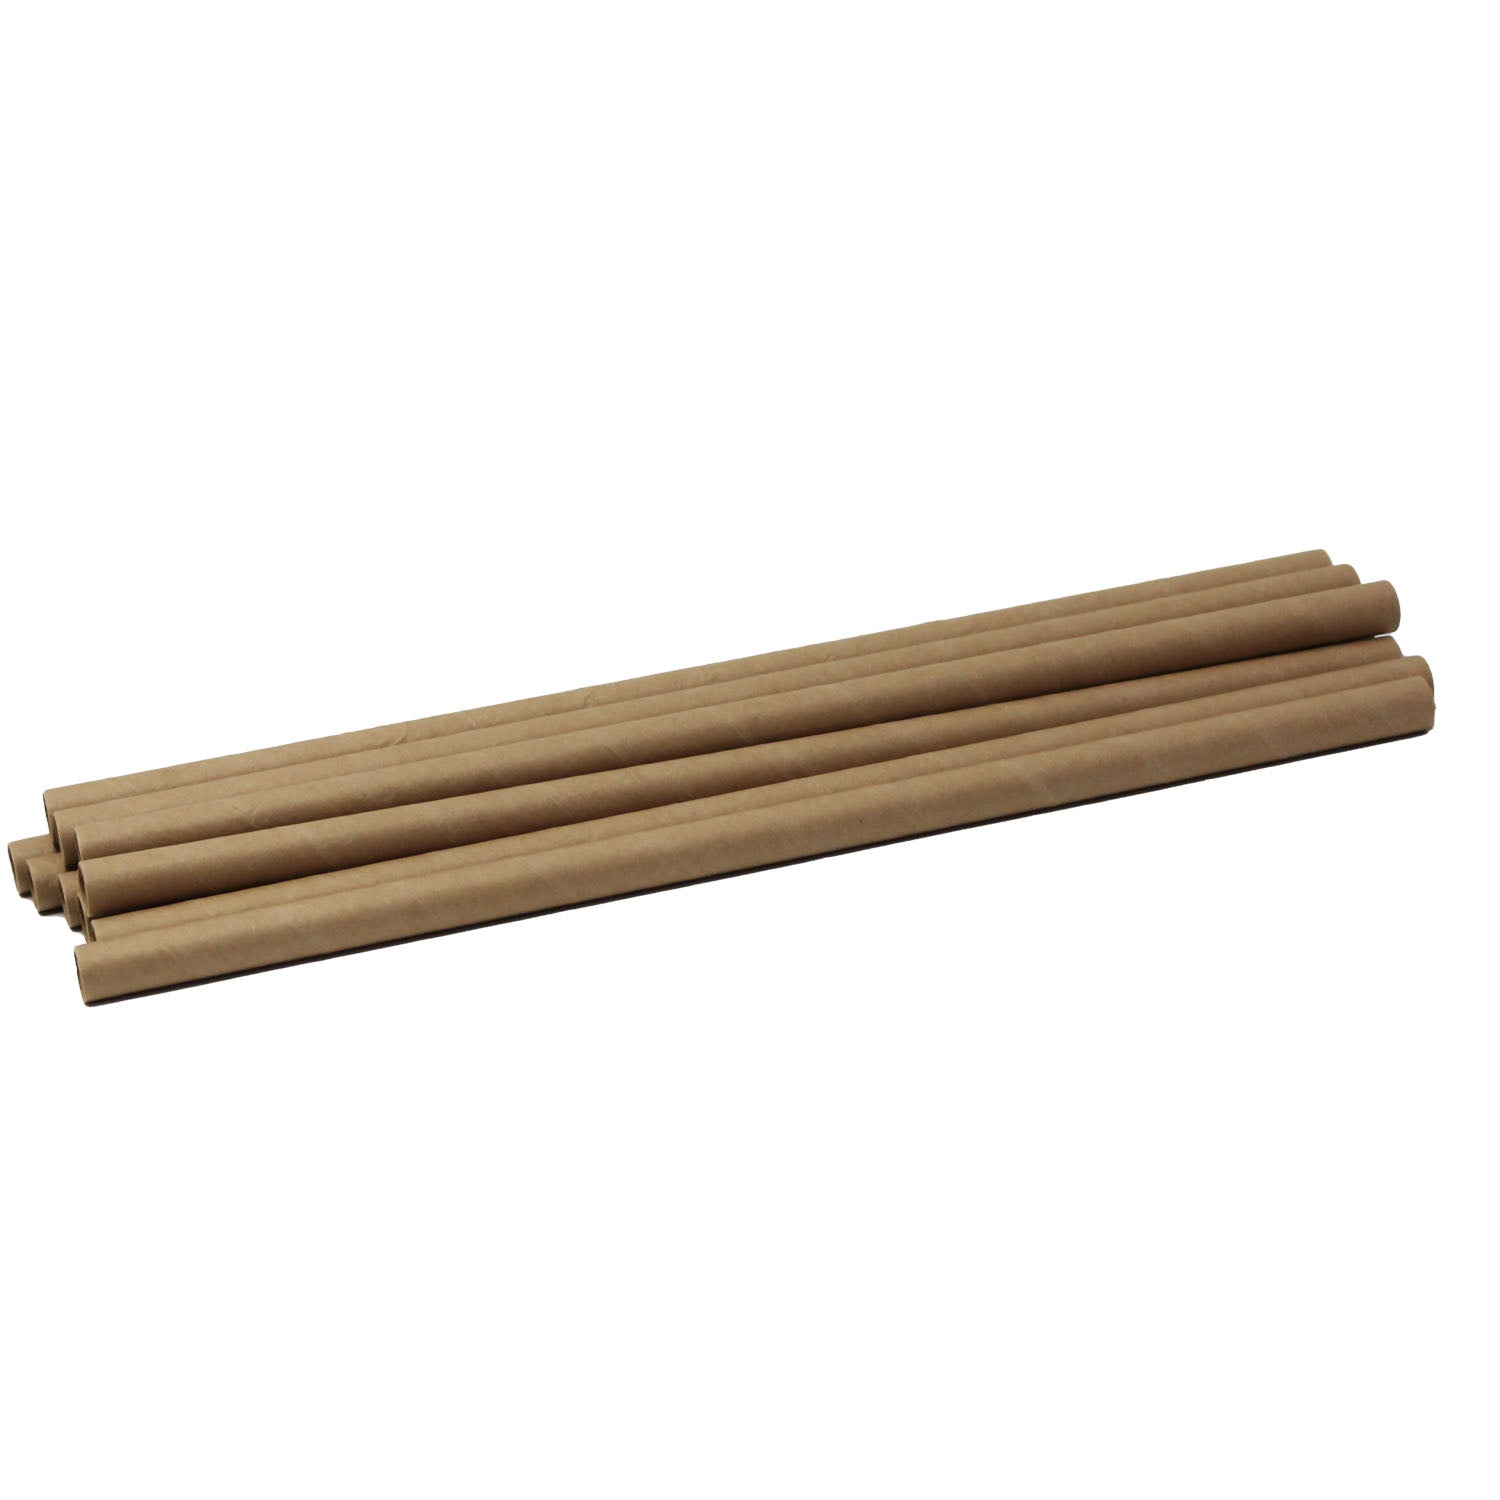 Wrapped Kraft Paper Smoothie Straws 0.3 Inch Wide, Biodegradable Brown Jumbo Durable Drinking Straws, Smoothies, Bubble Tea, Boba, Meal Prep, Shakes